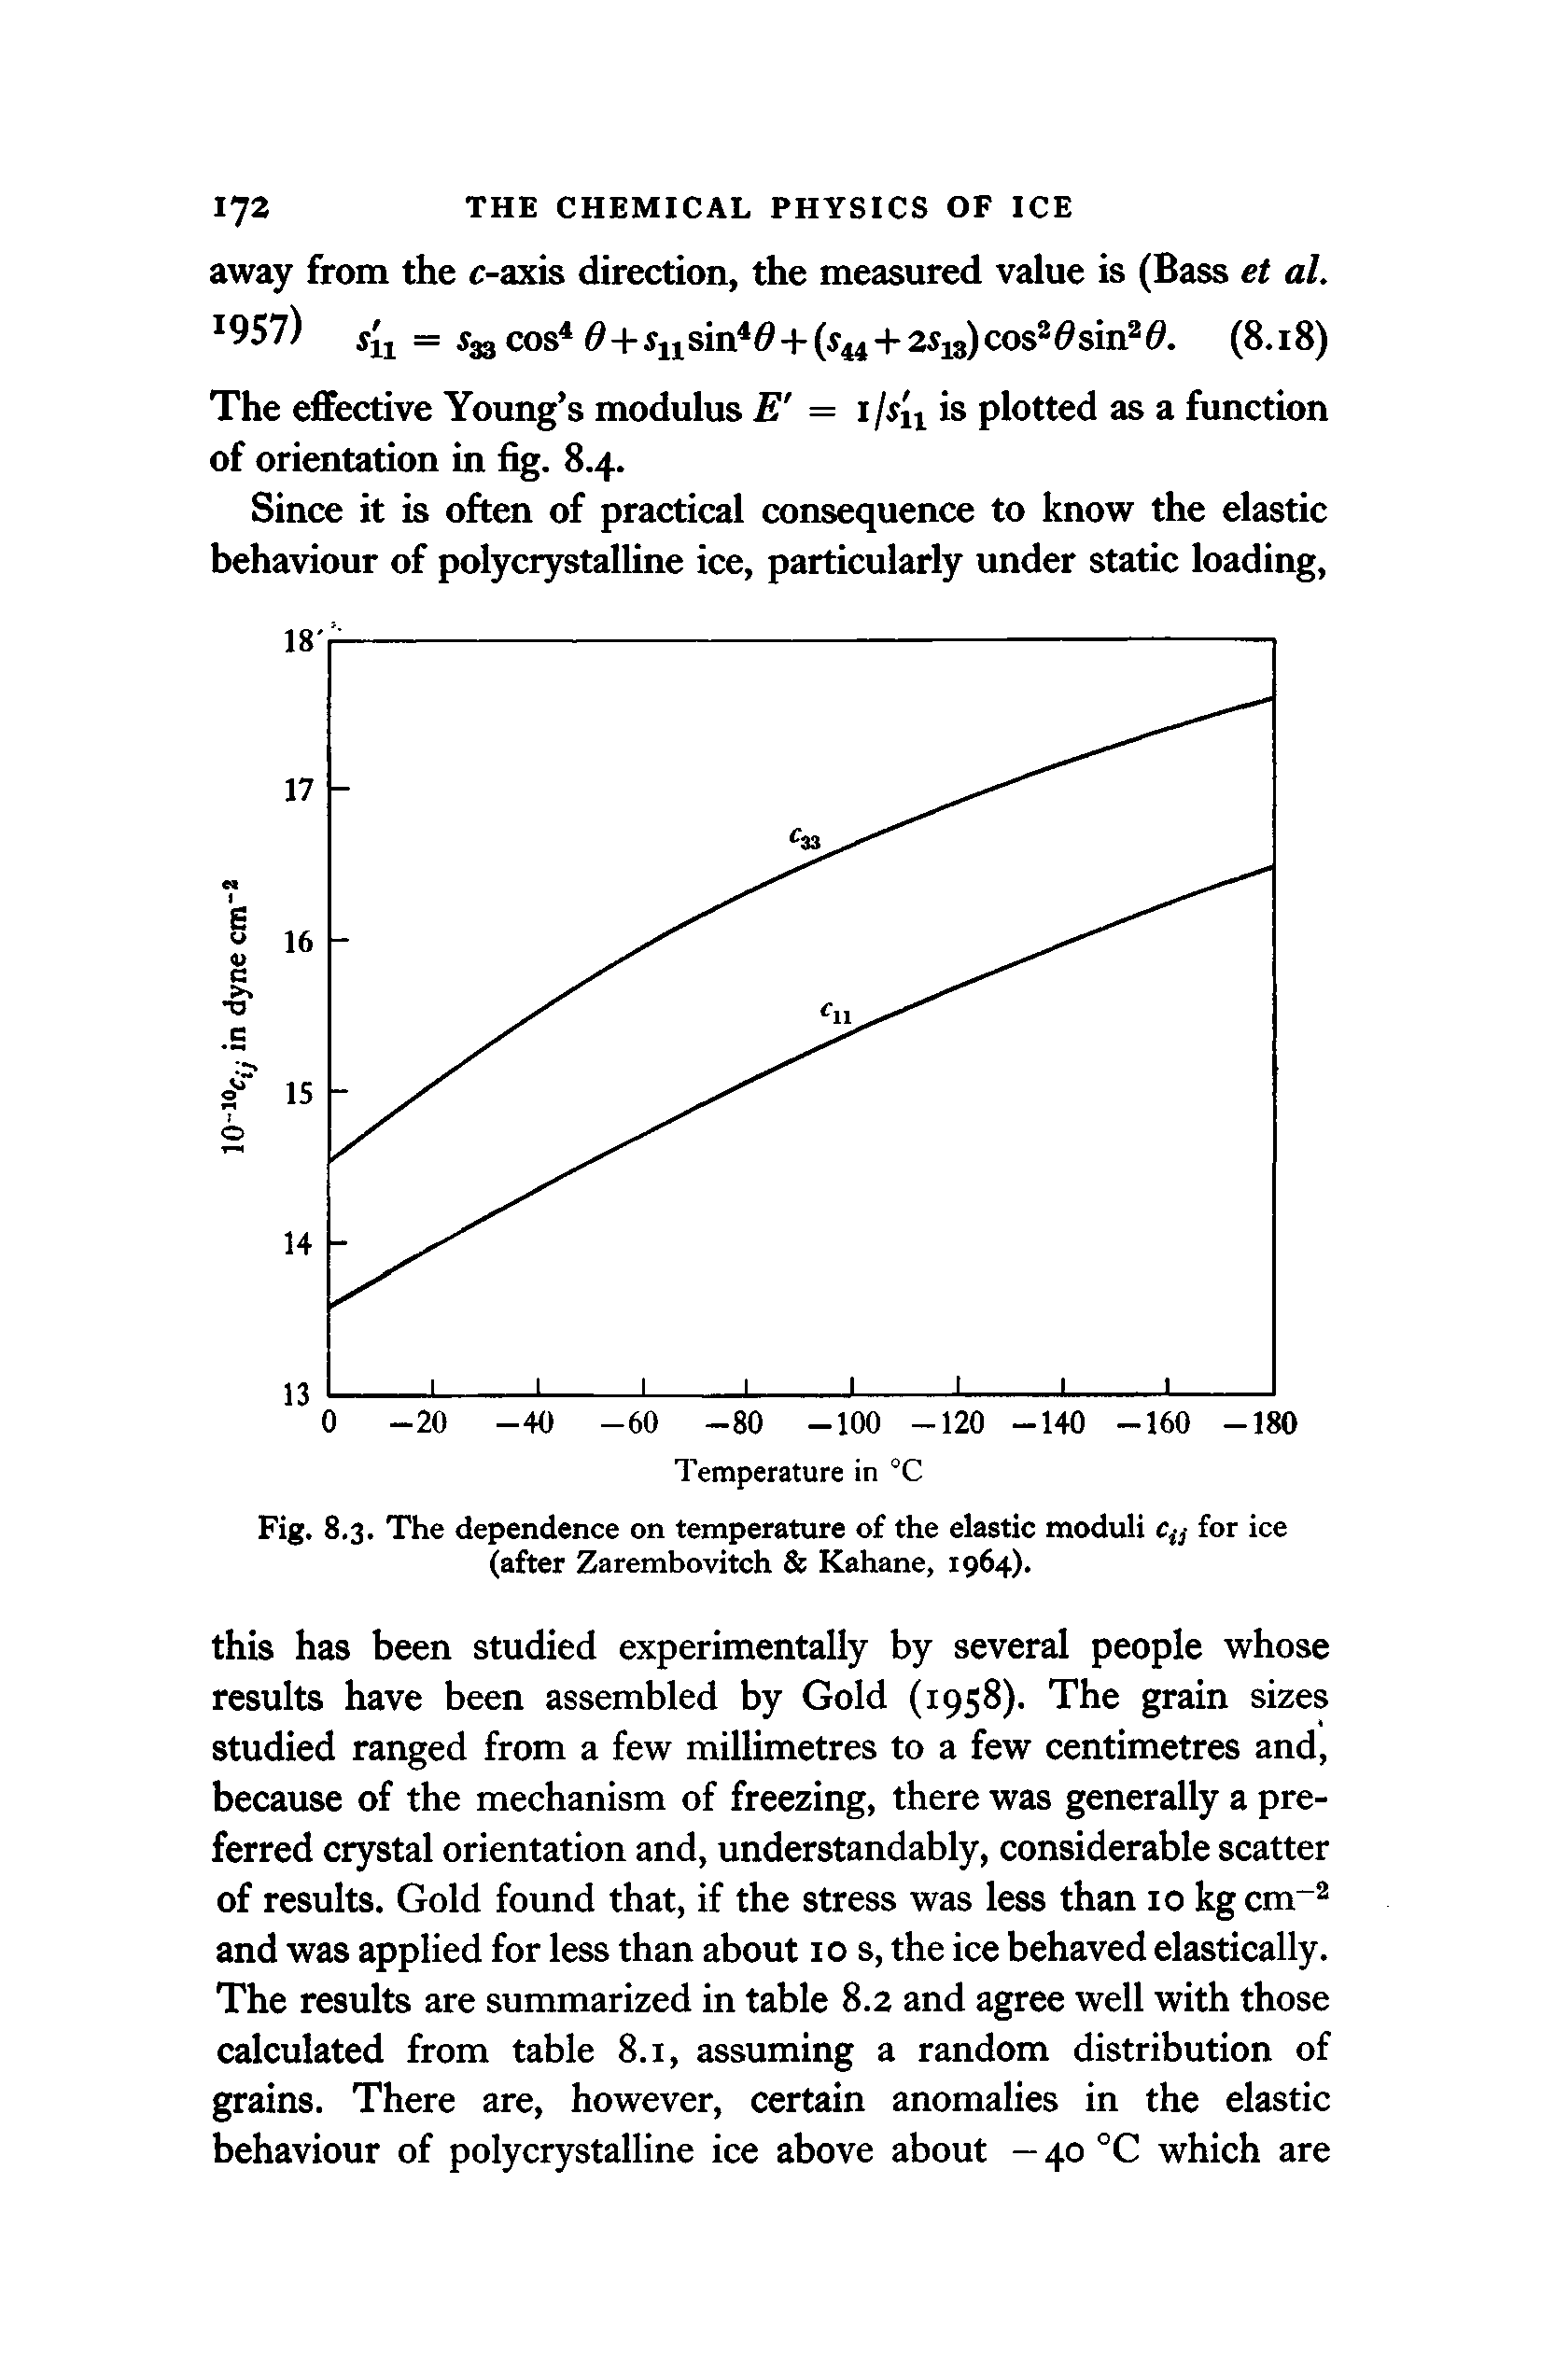 Fig. 8.3. The dependence on temperature of the elastic moduli % for ice (after Zarembovitch Kahane, 1964).